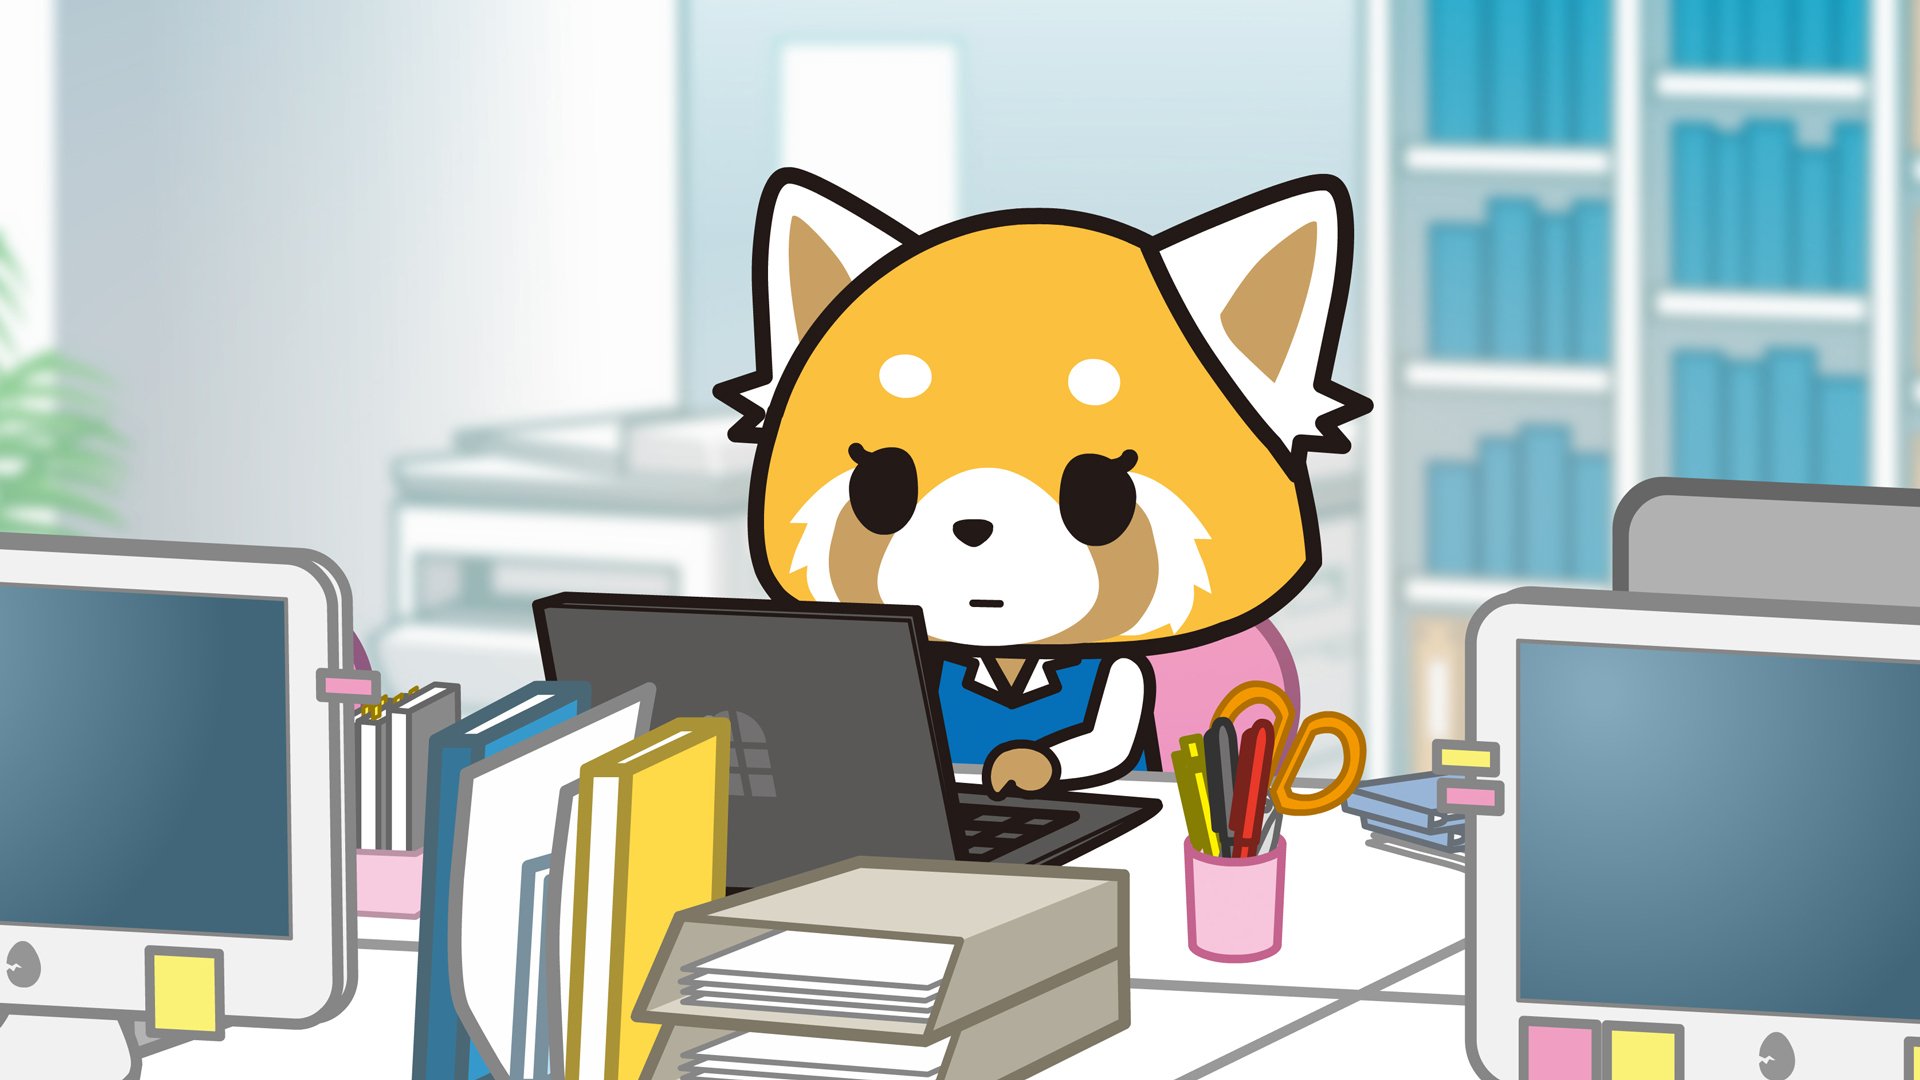 An animated red panda sits at an office desk typing at a computer.